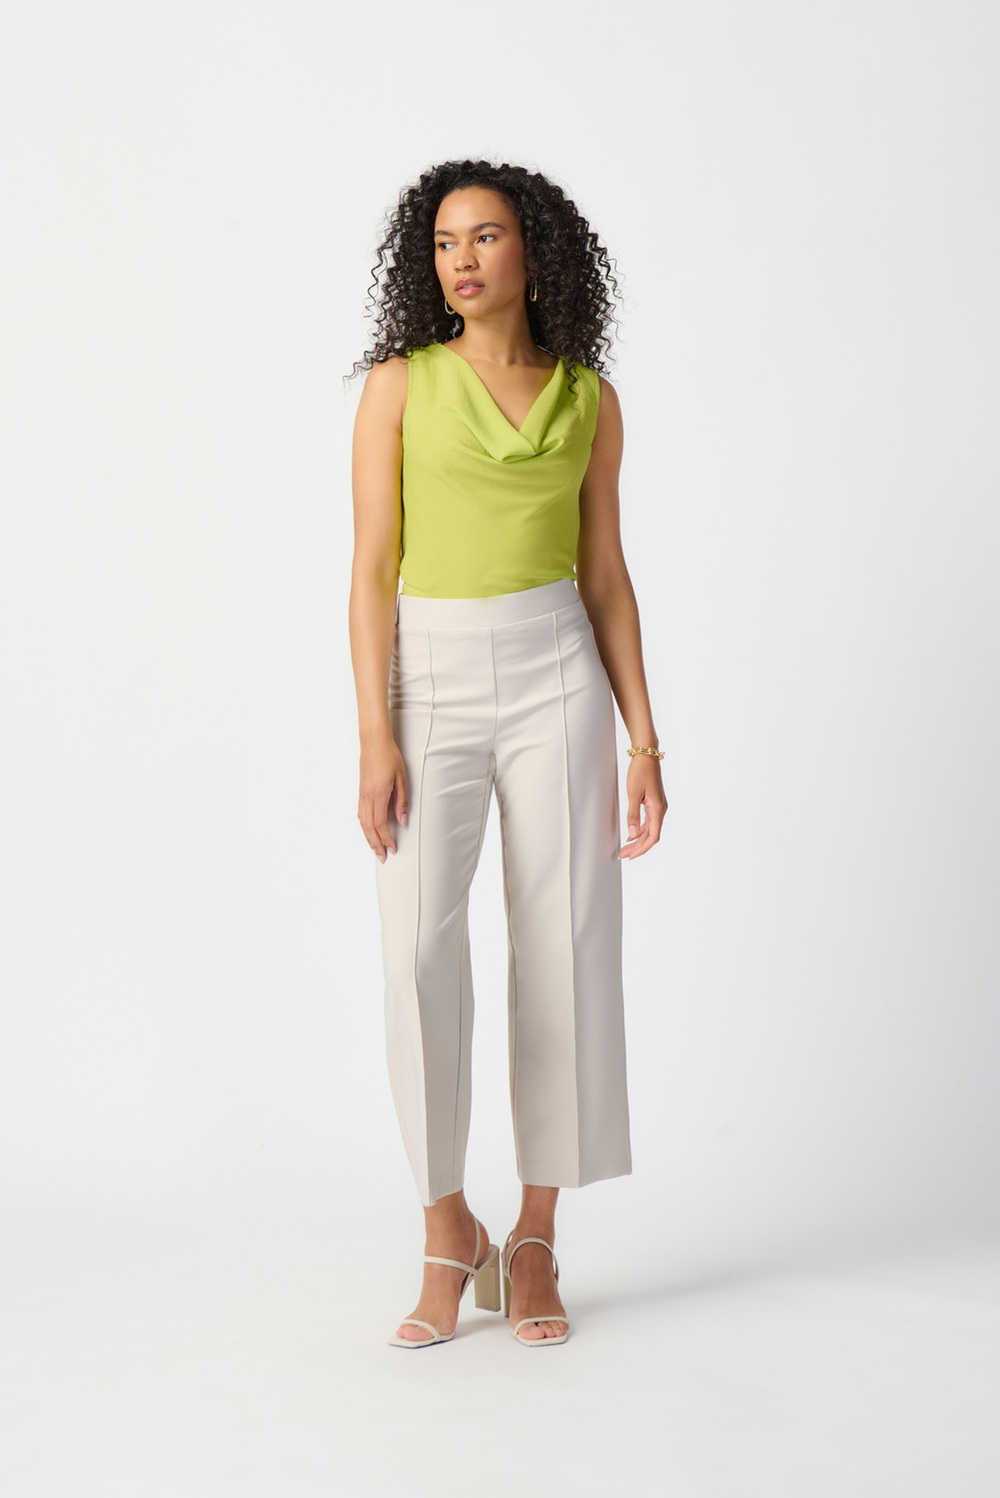 Seam Detail Cropped Pants Style 241185. Moonstone